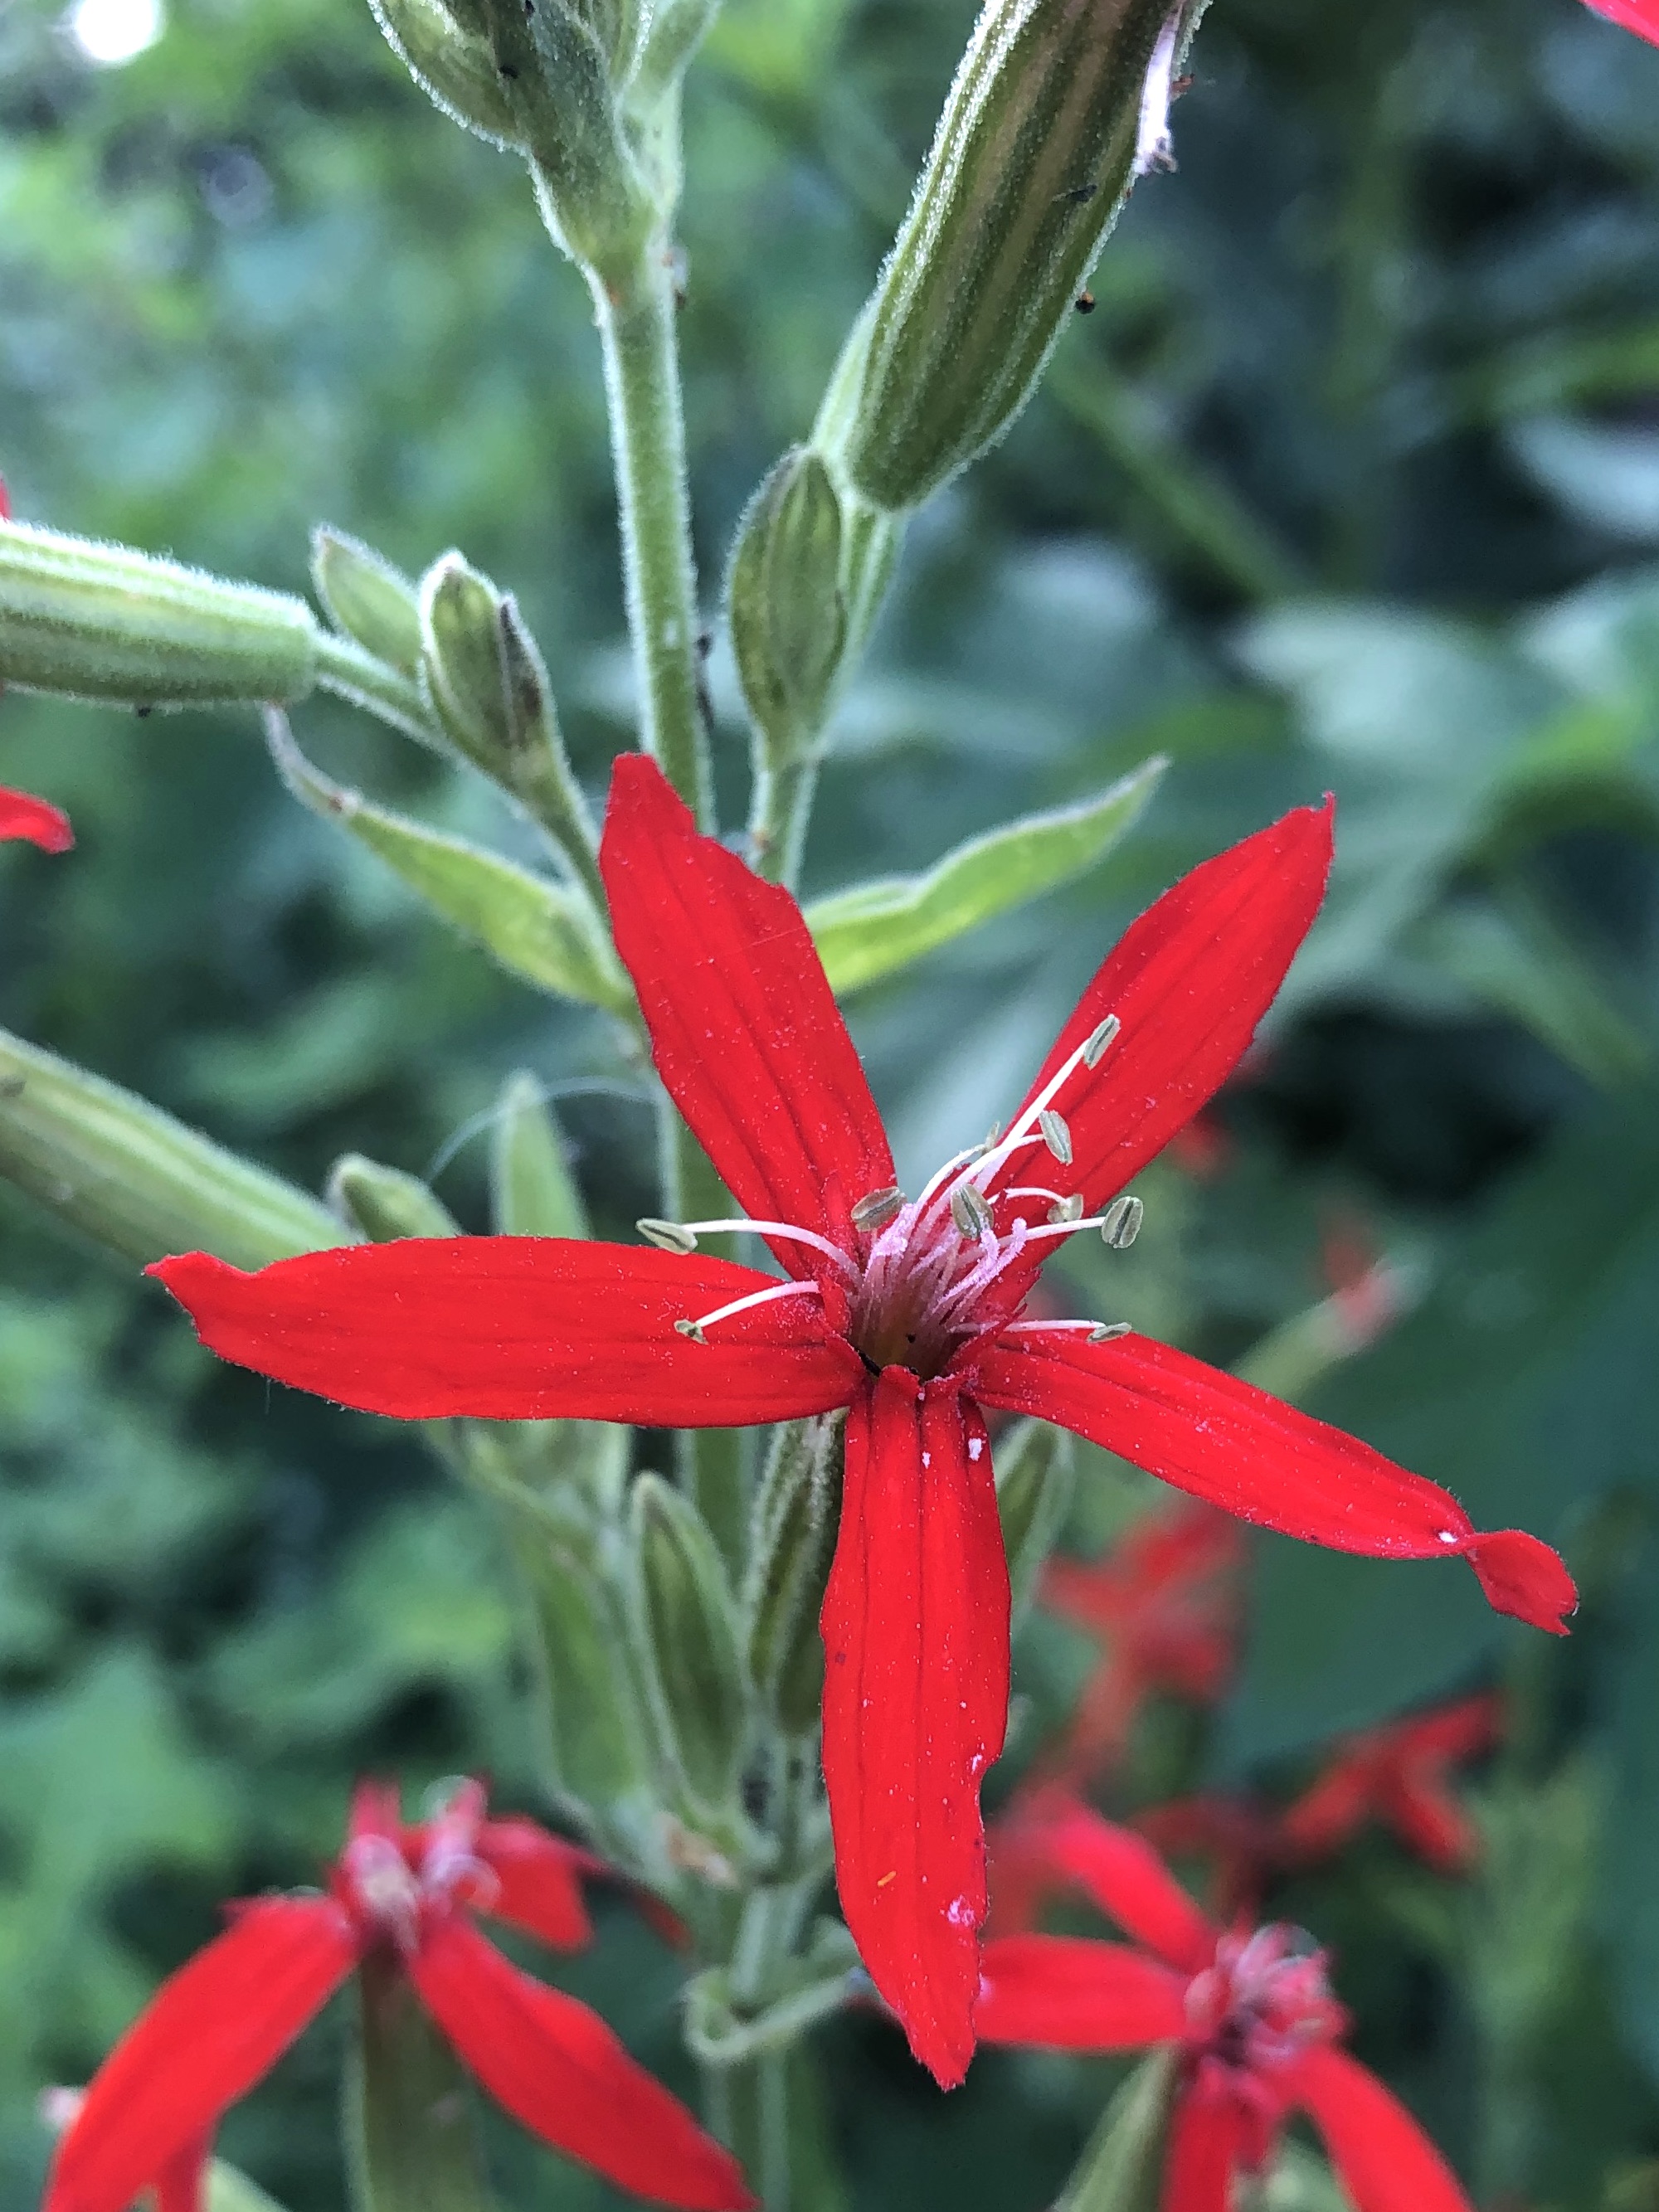 Royal Catchfly in wildflower garden along bike path at Glenway Street in Madison, Wisconsin on July 19, 2022.